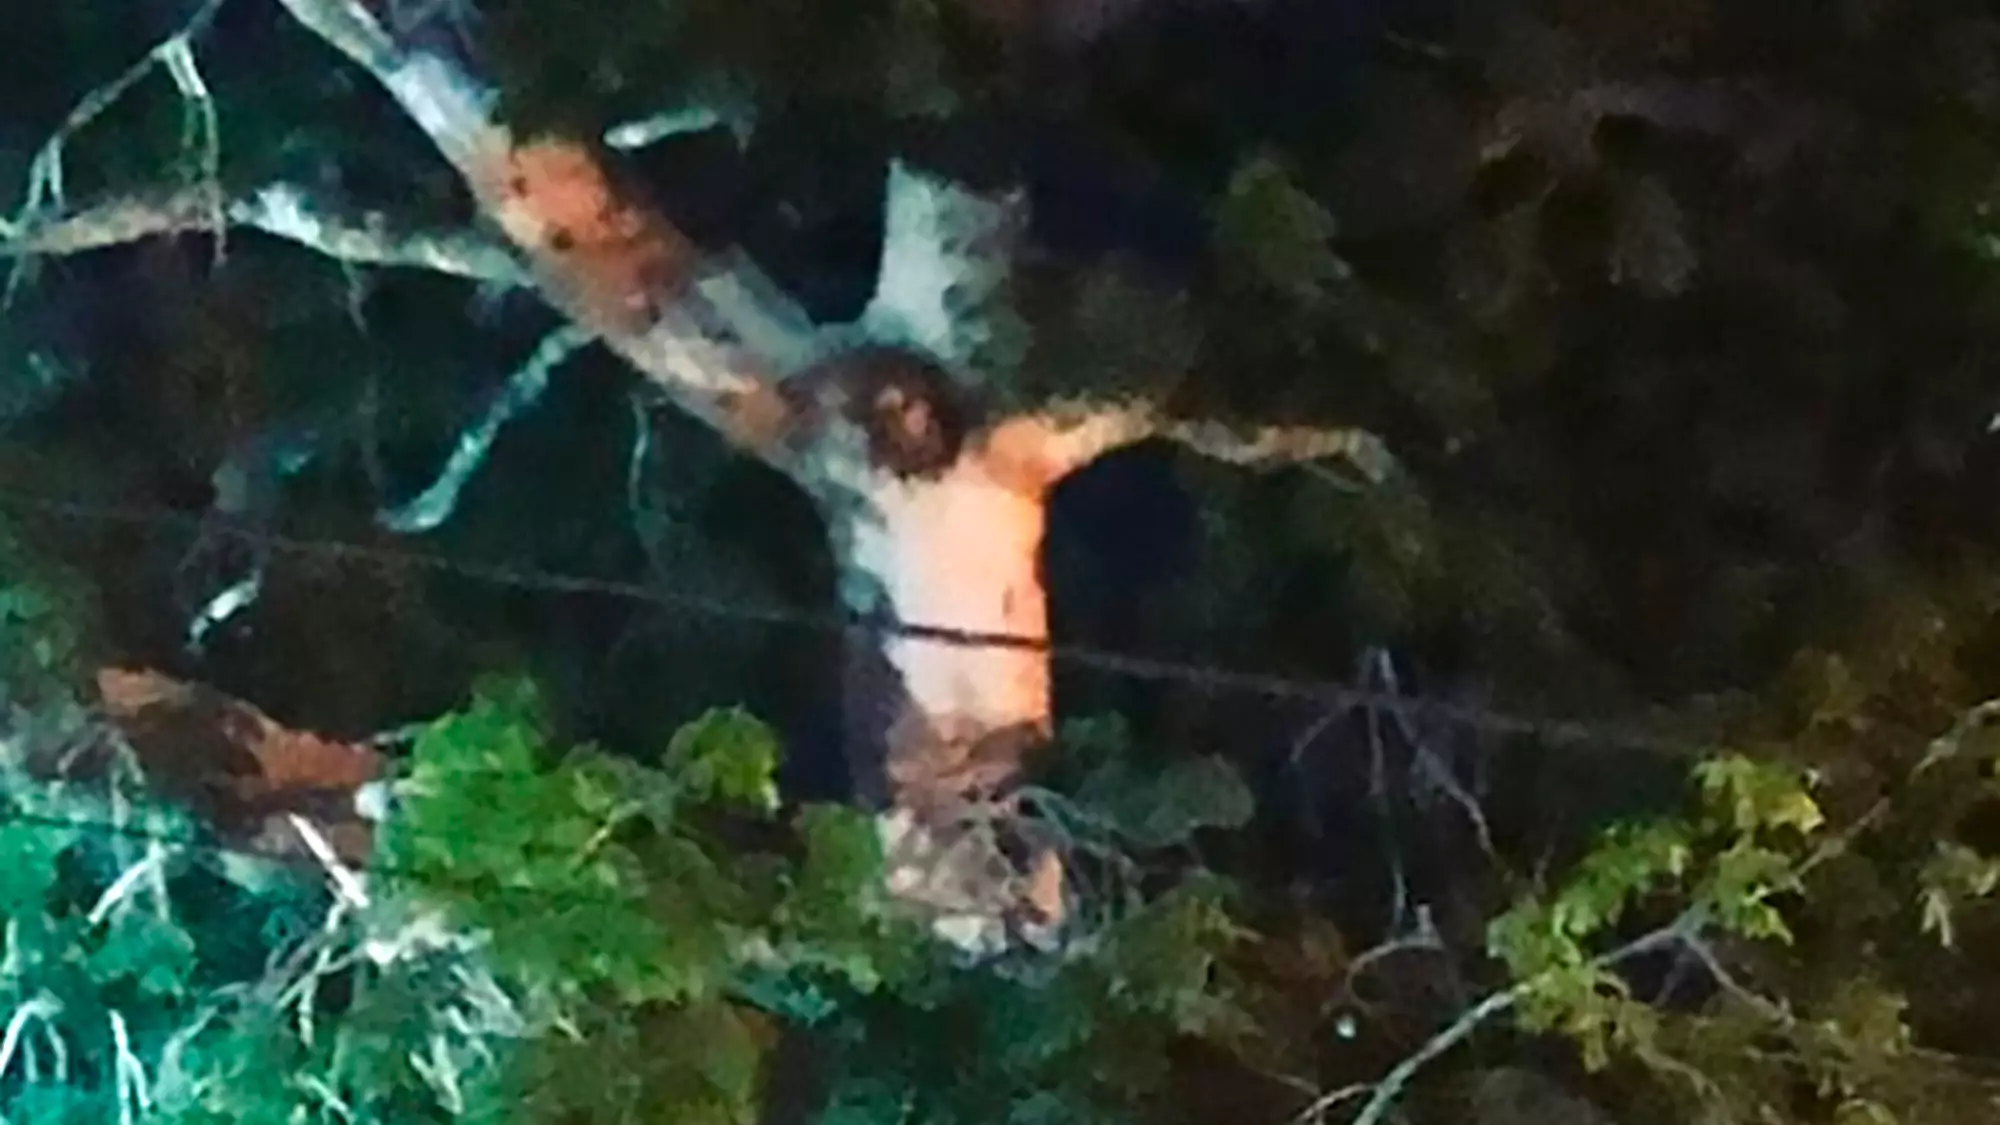 Locals Gather In Colombia Despite Lockdown As Image Of Jesus Christ 'Appears In Tree'